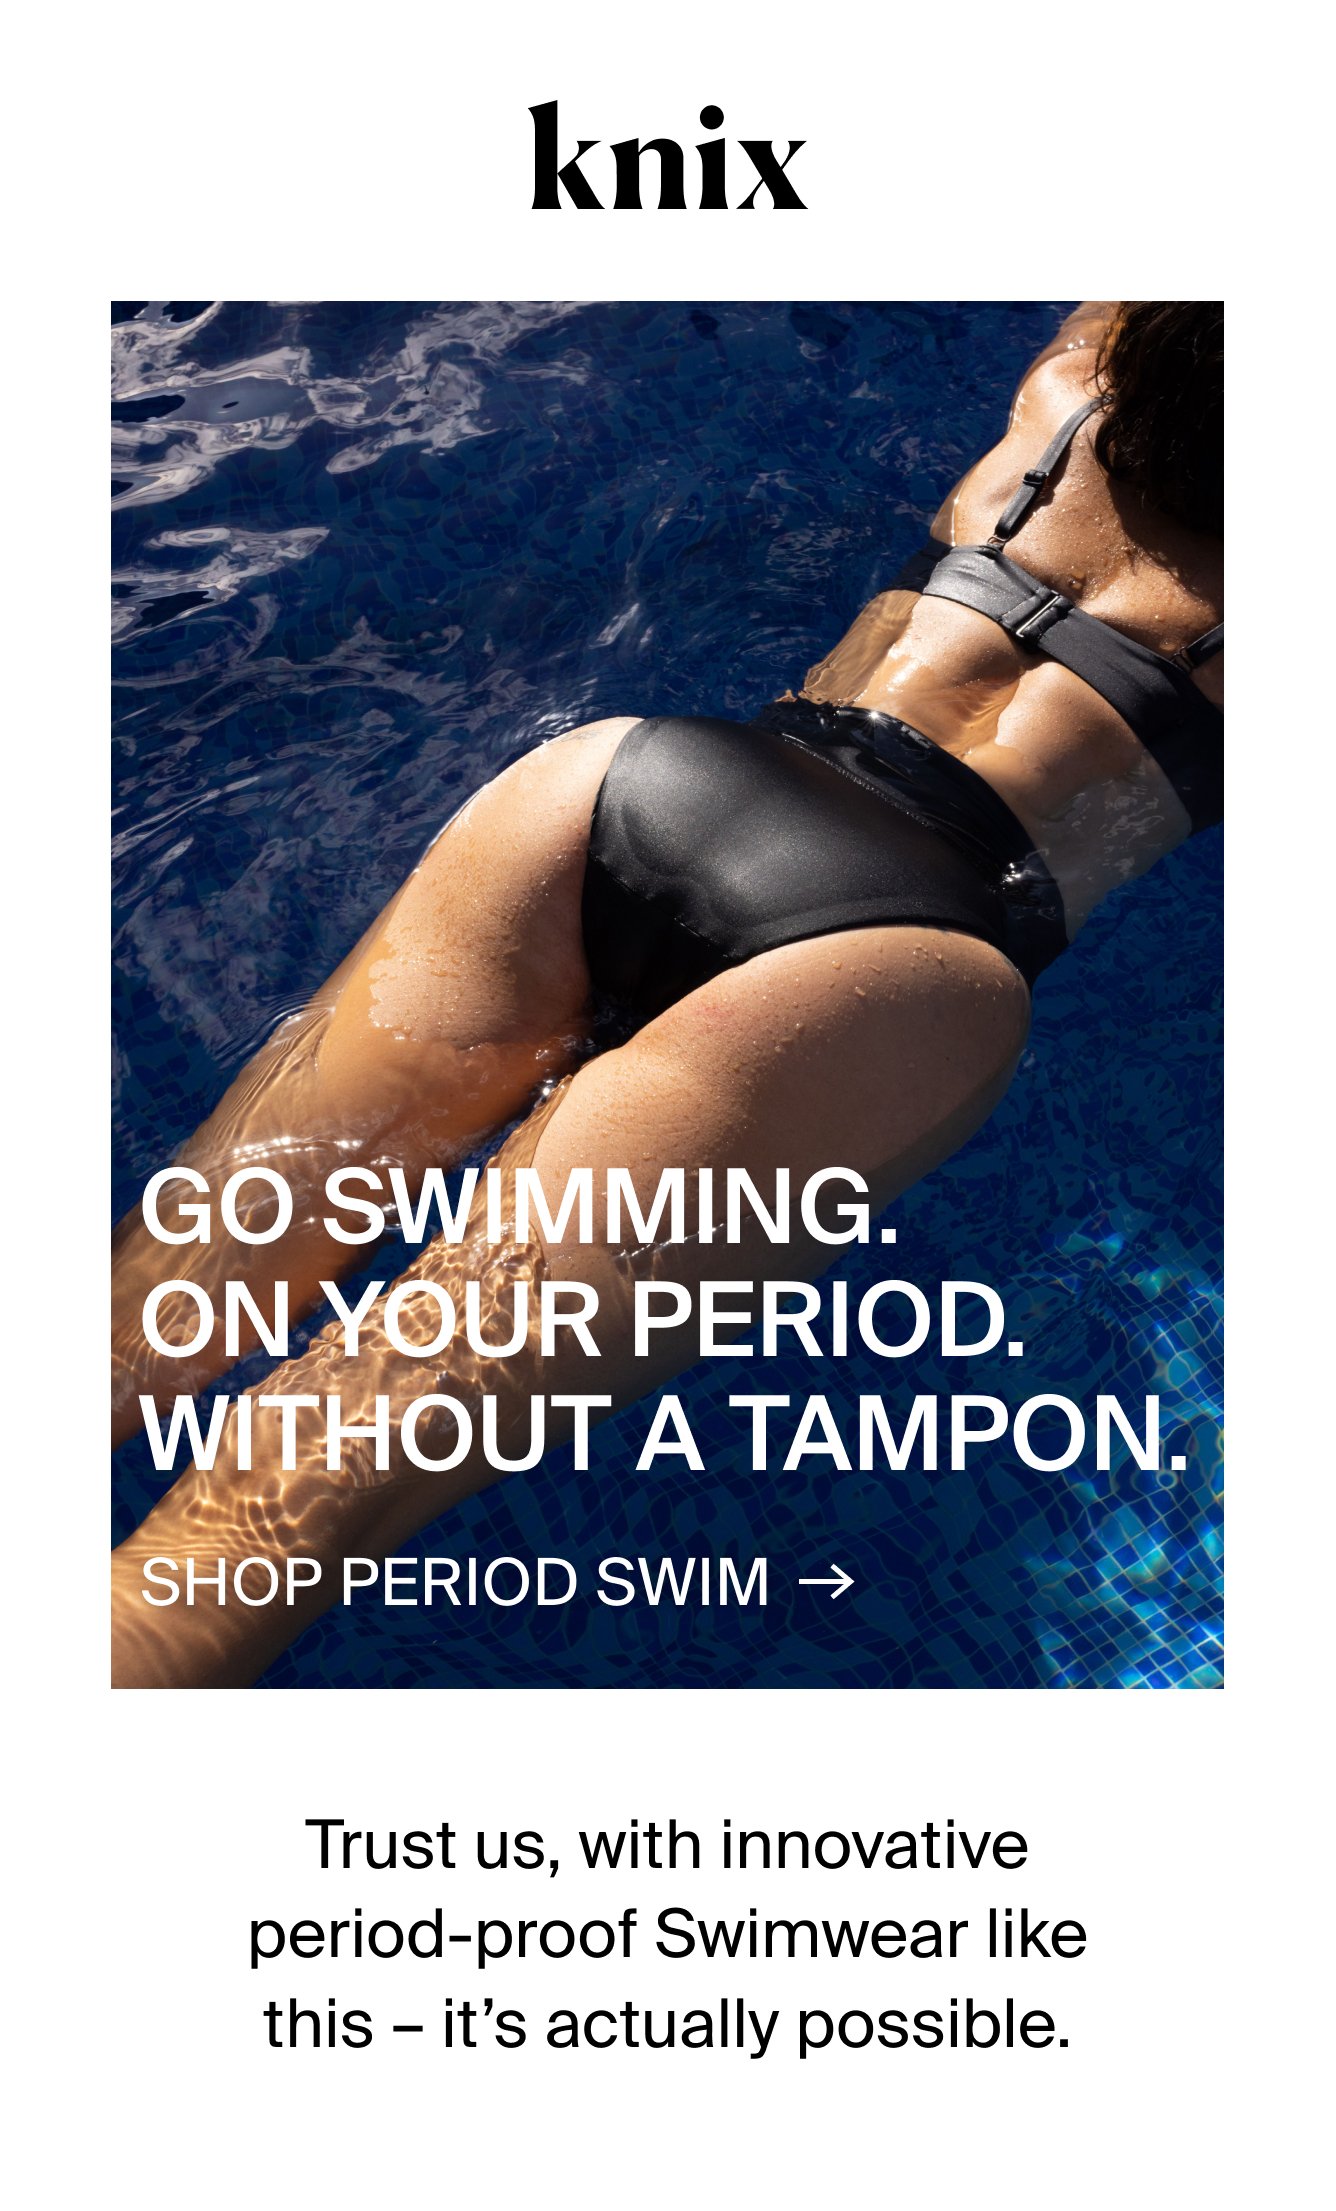 Yes, You Can Swim on Your Period With or Without a Tampon